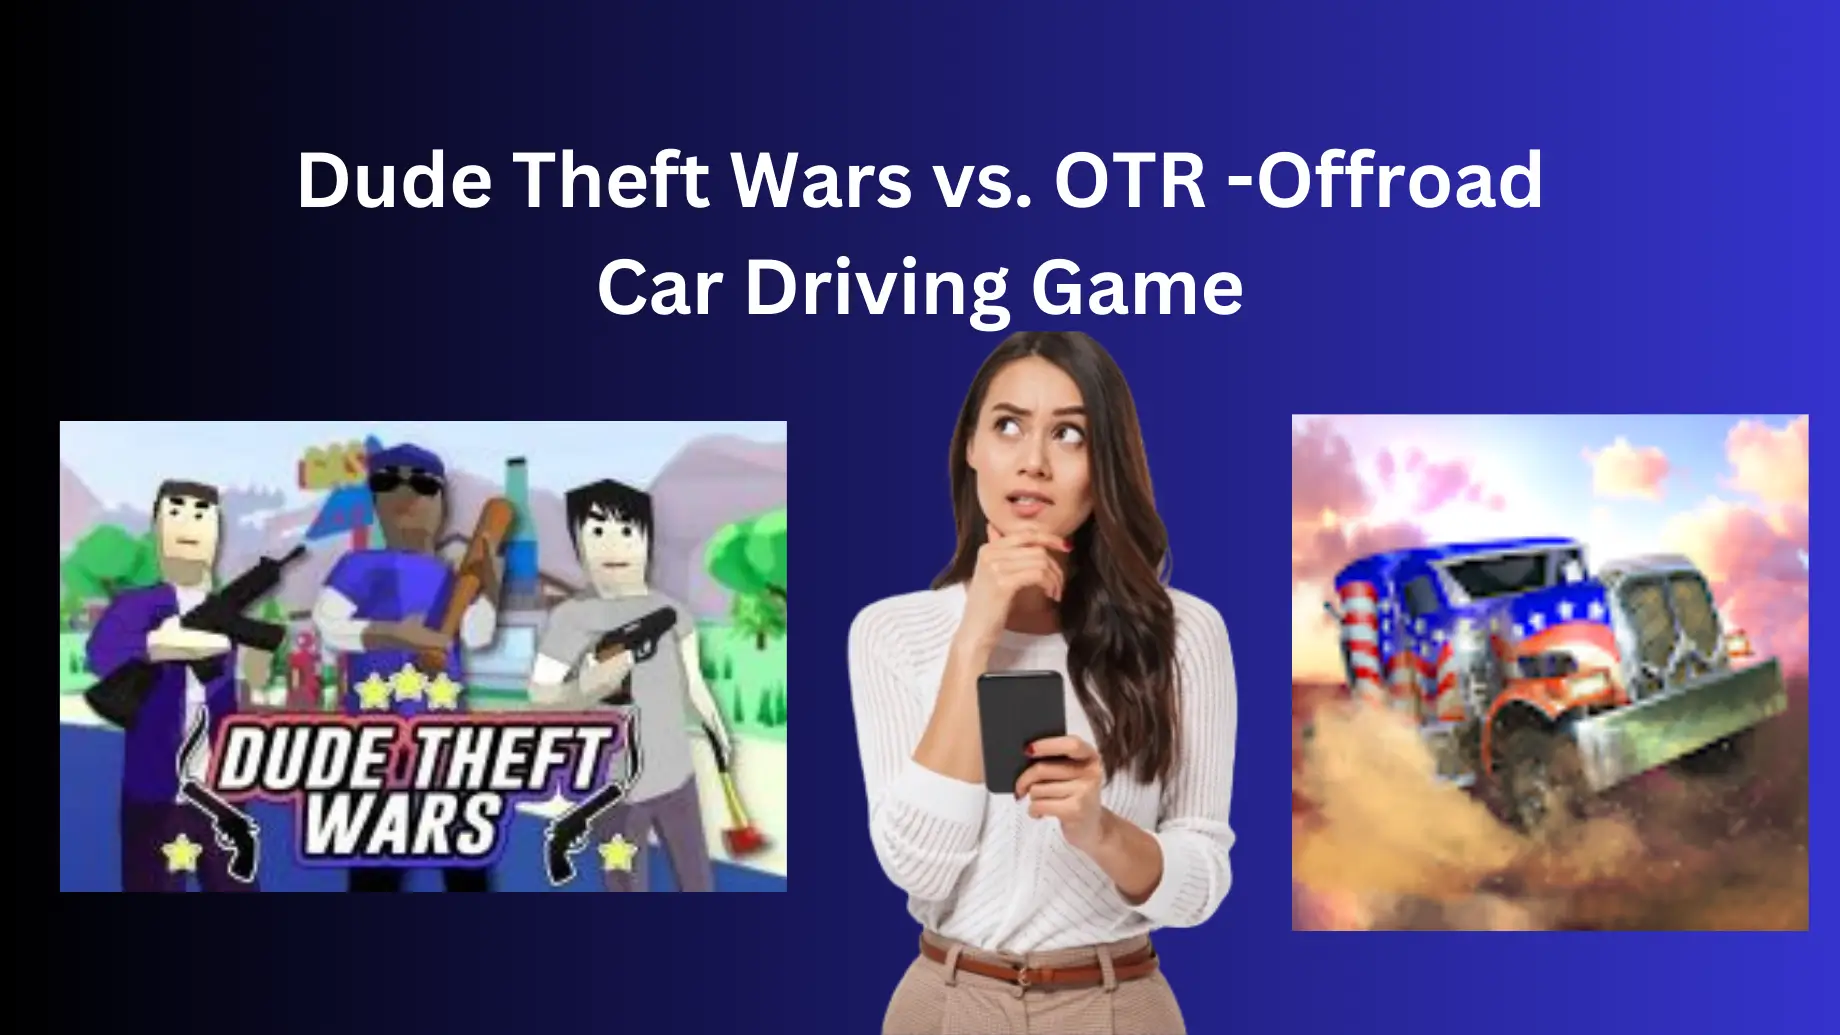 Compare Dude Theft Wars and OTR - Offroad Car Driving